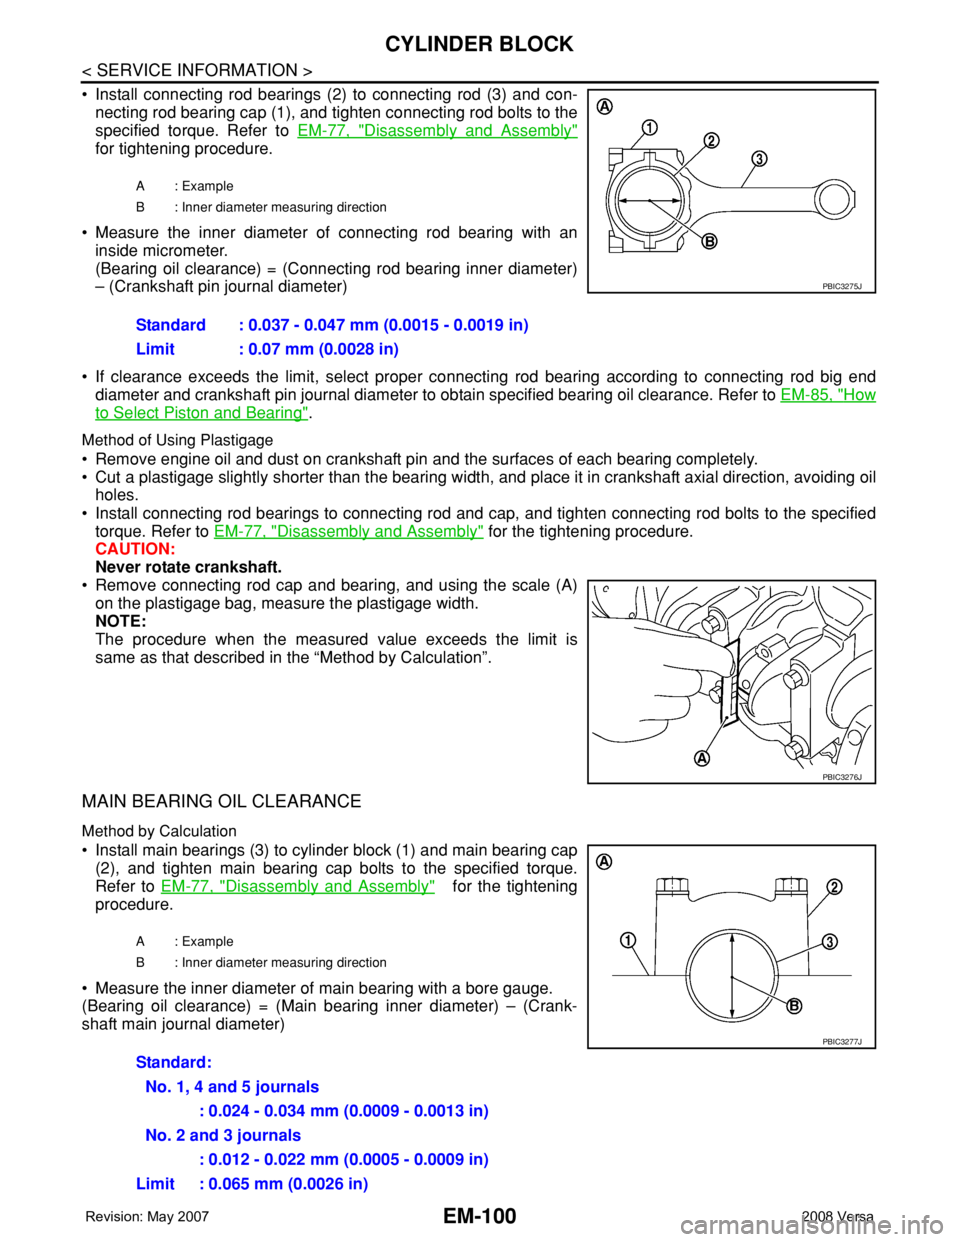 NISSAN TIIDA 2008  Service User Guide EM-100
< SERVICE INFORMATION >
CYLINDER BLOCK
• Install connecting rod bearings (2) to connecting rod (3) and con-
necting rod bearing cap (1), and tighten connecting rod bolts to the
specified torq